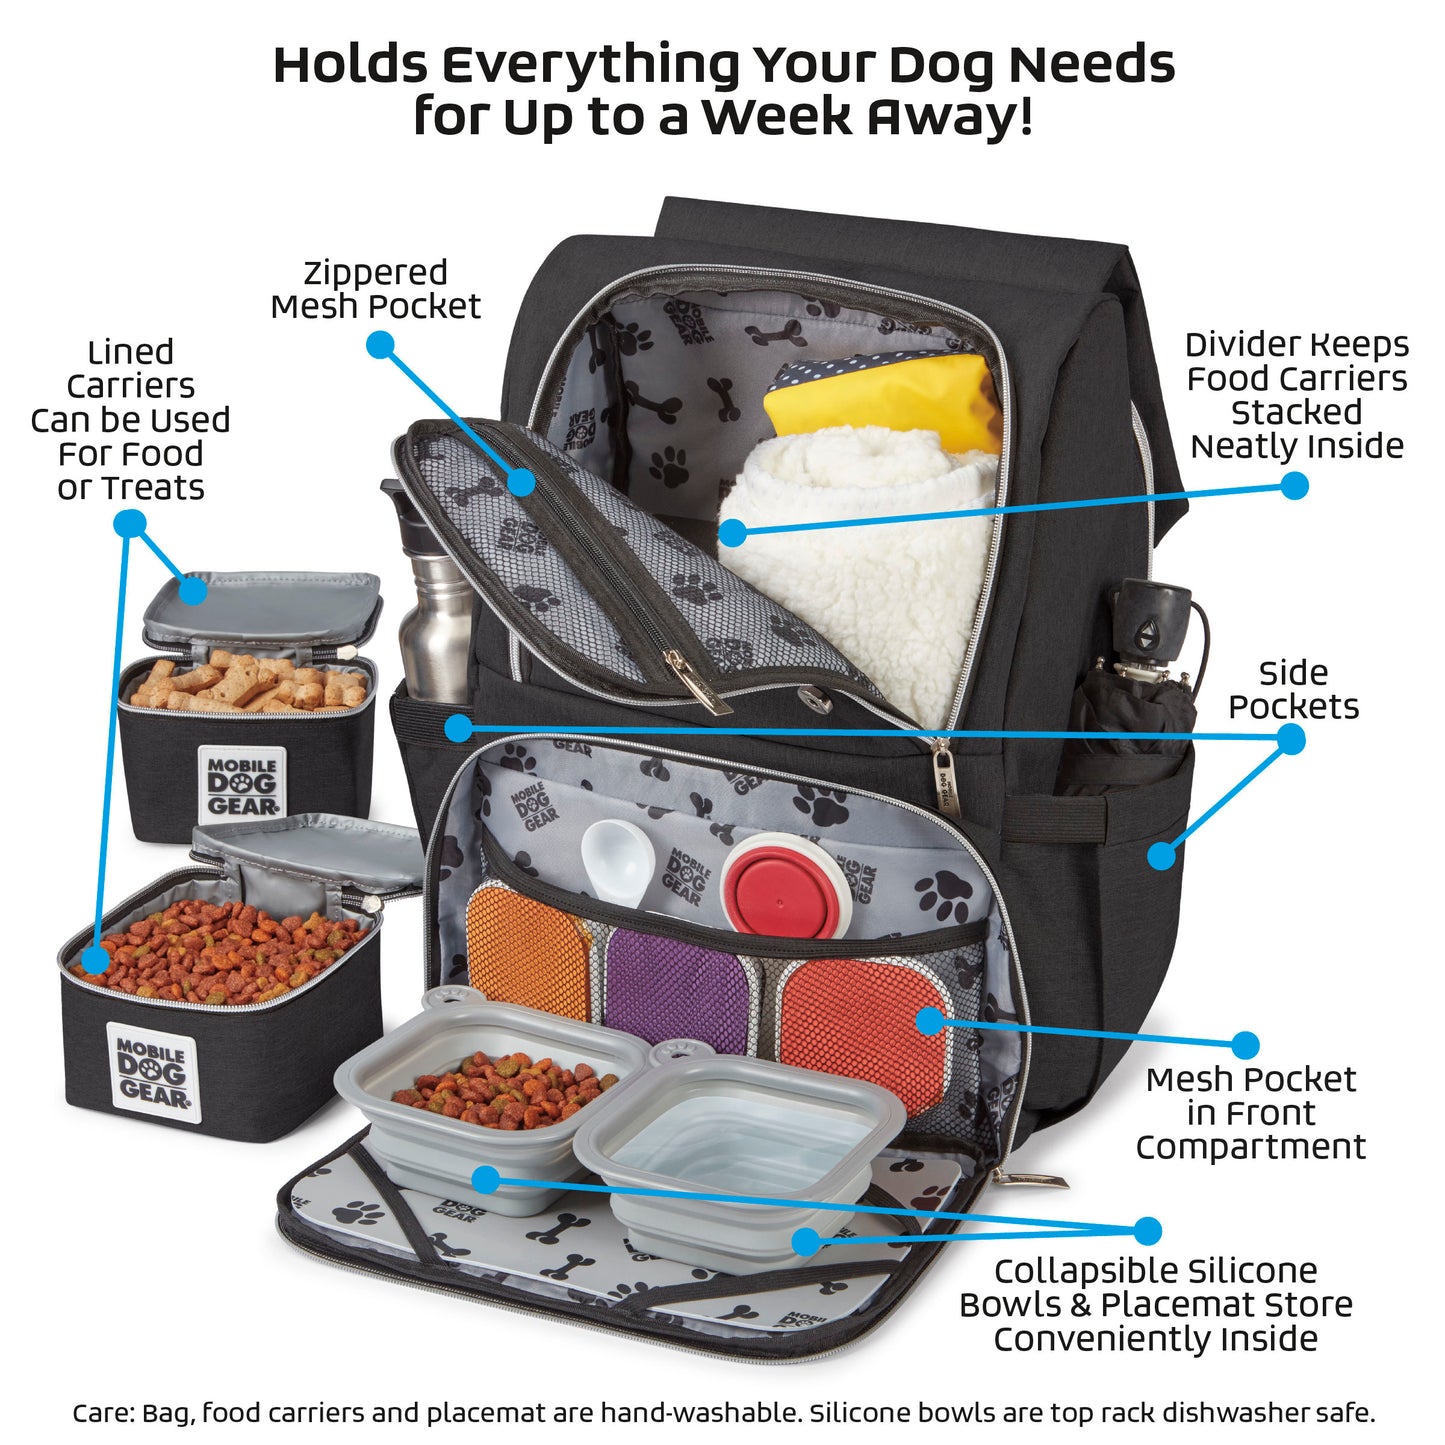 Adventure-Ready Companion: The Mobile Dog Gear Ultimate Week Away Backpack for Hassle-Free Travel with Your Pet